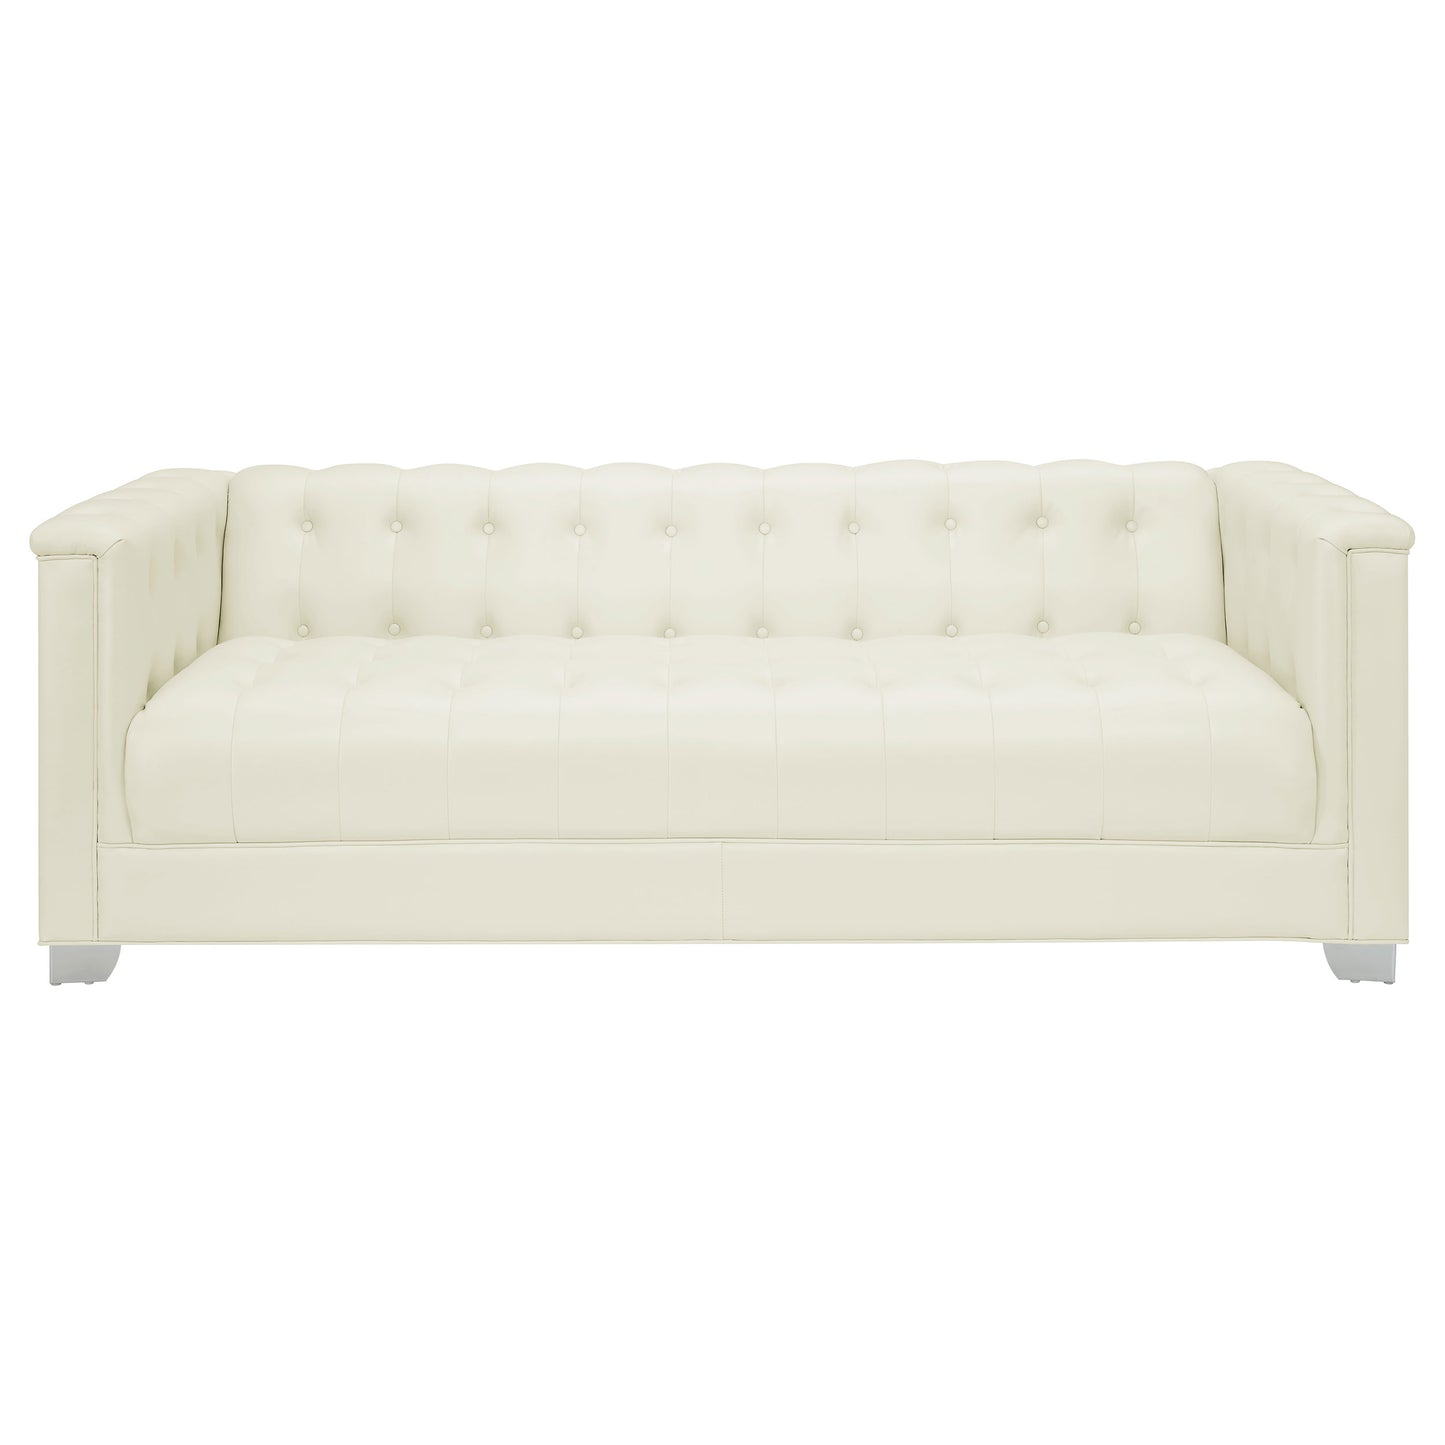 Chaviano 2-piece Upholstered Tufted Sofa Set Pearl White